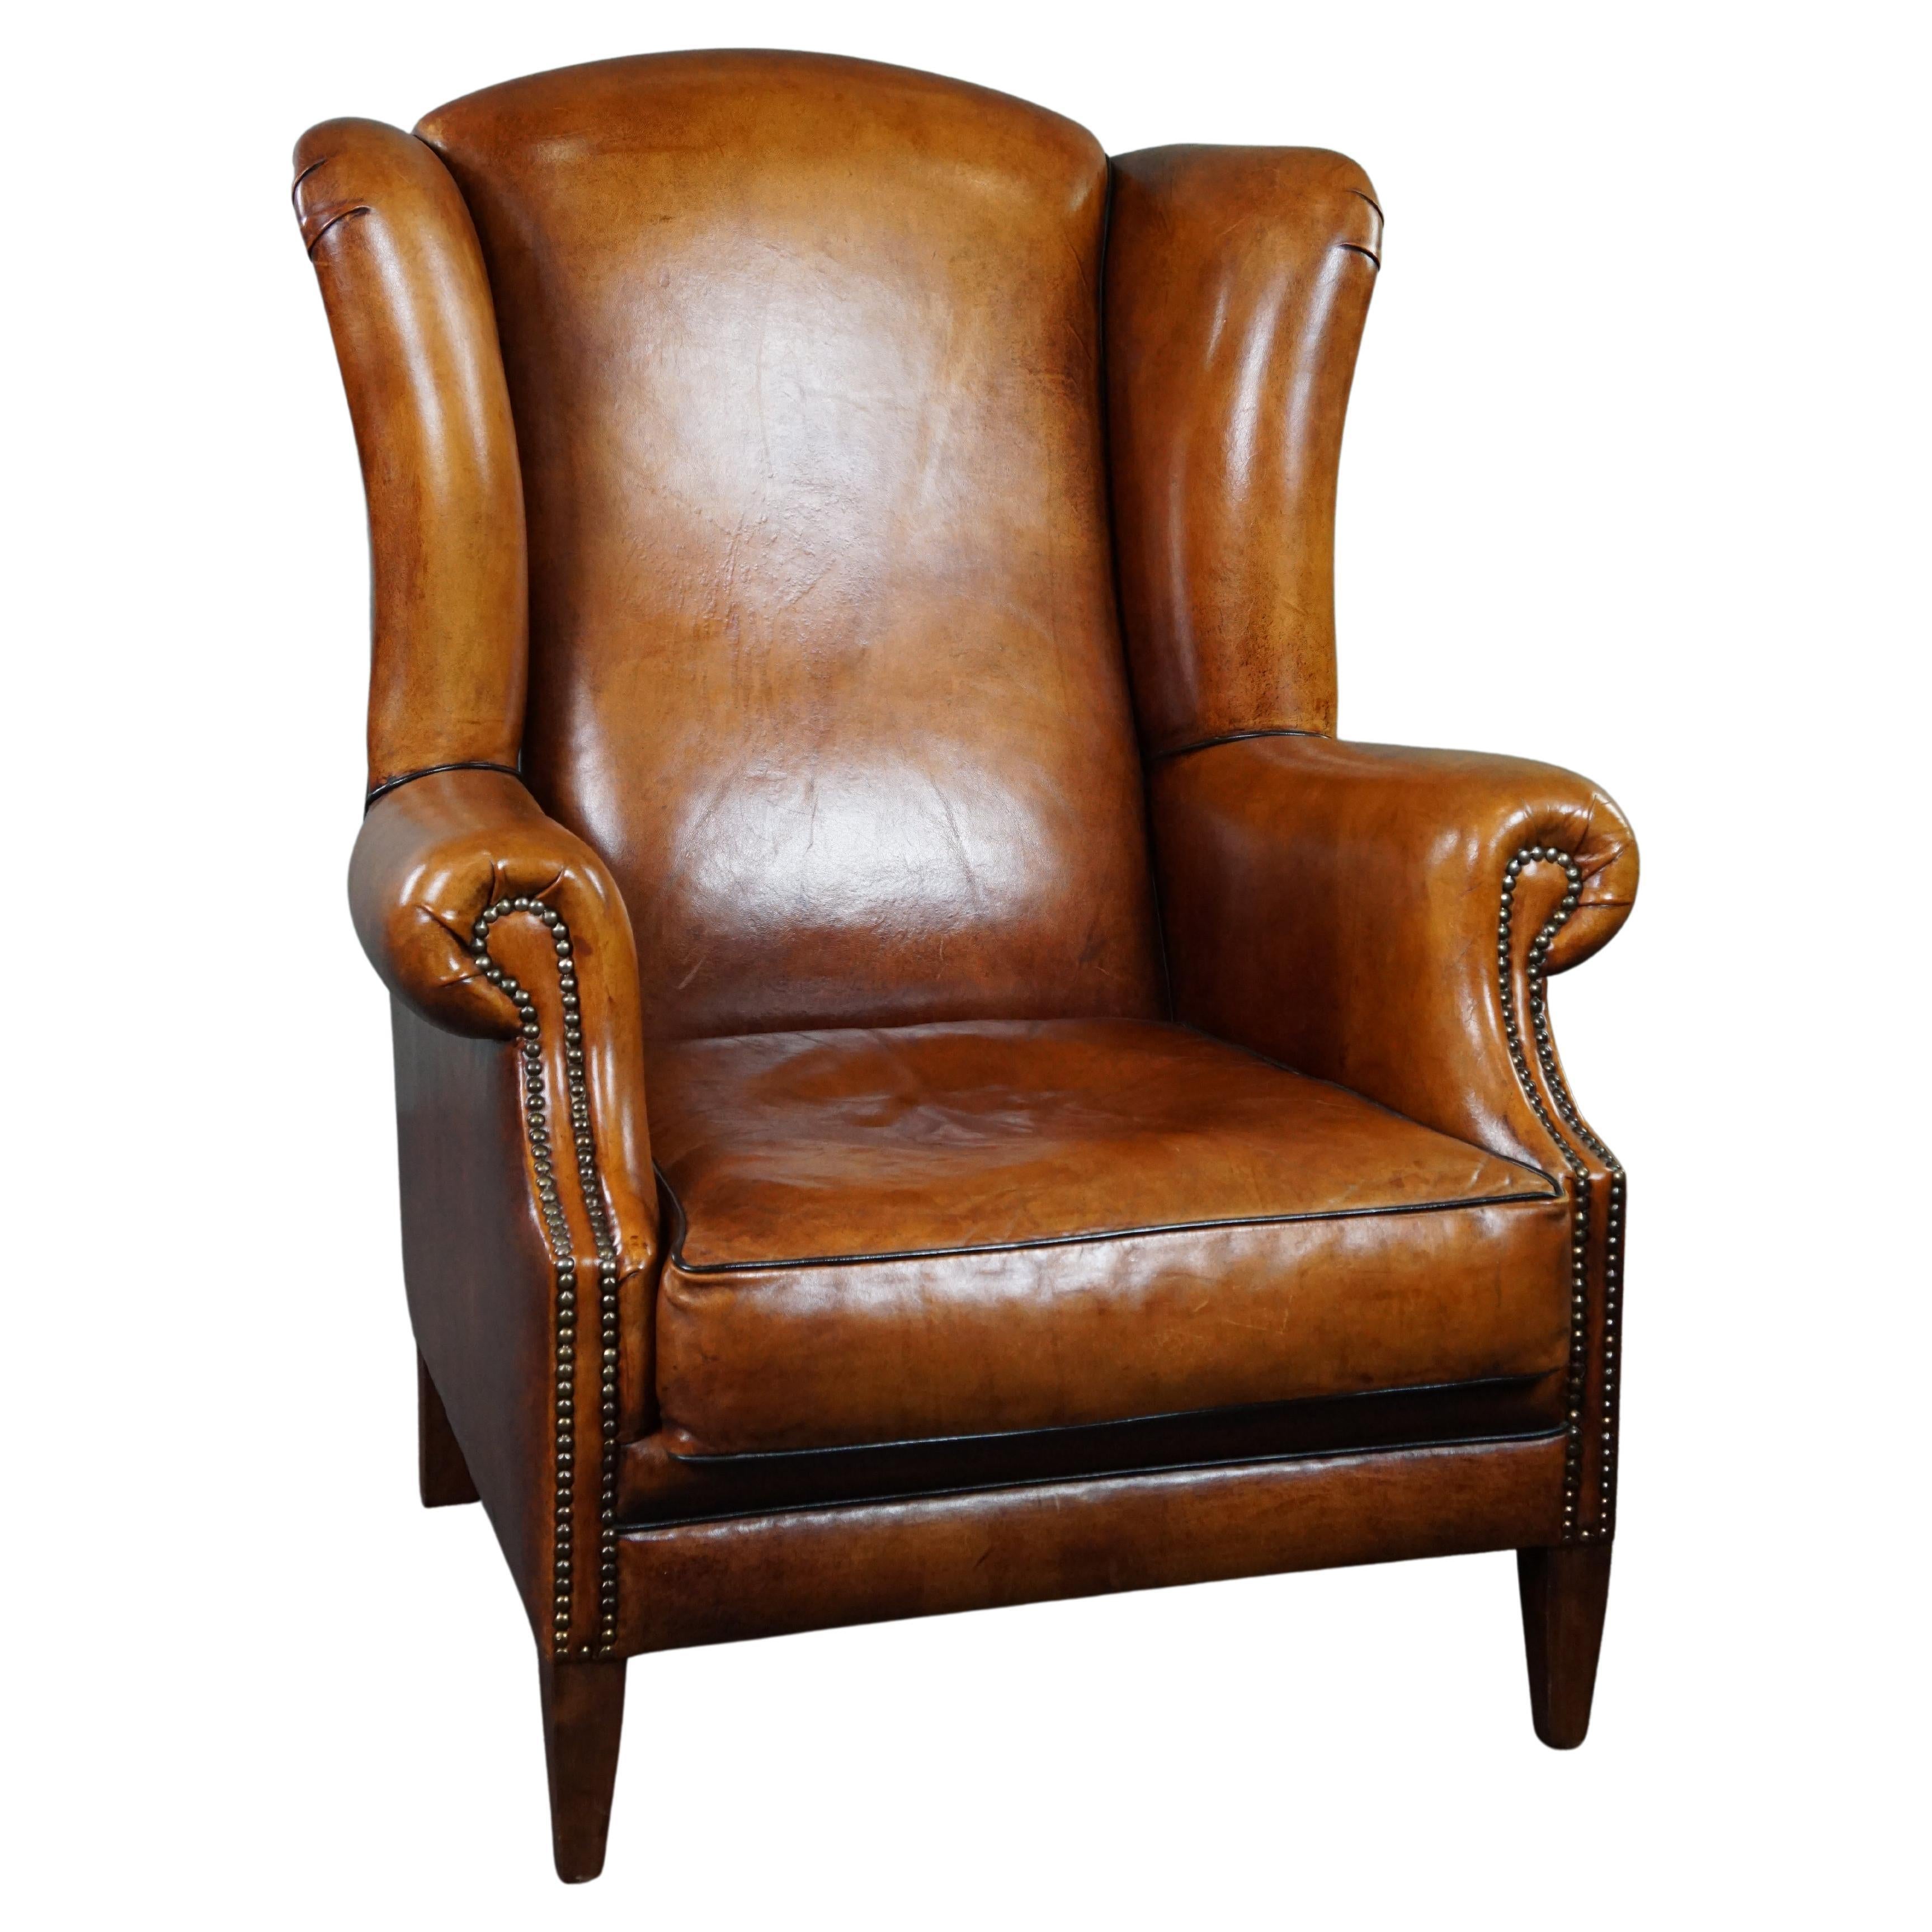 Sheepskin wingback chair with black piping For Sale